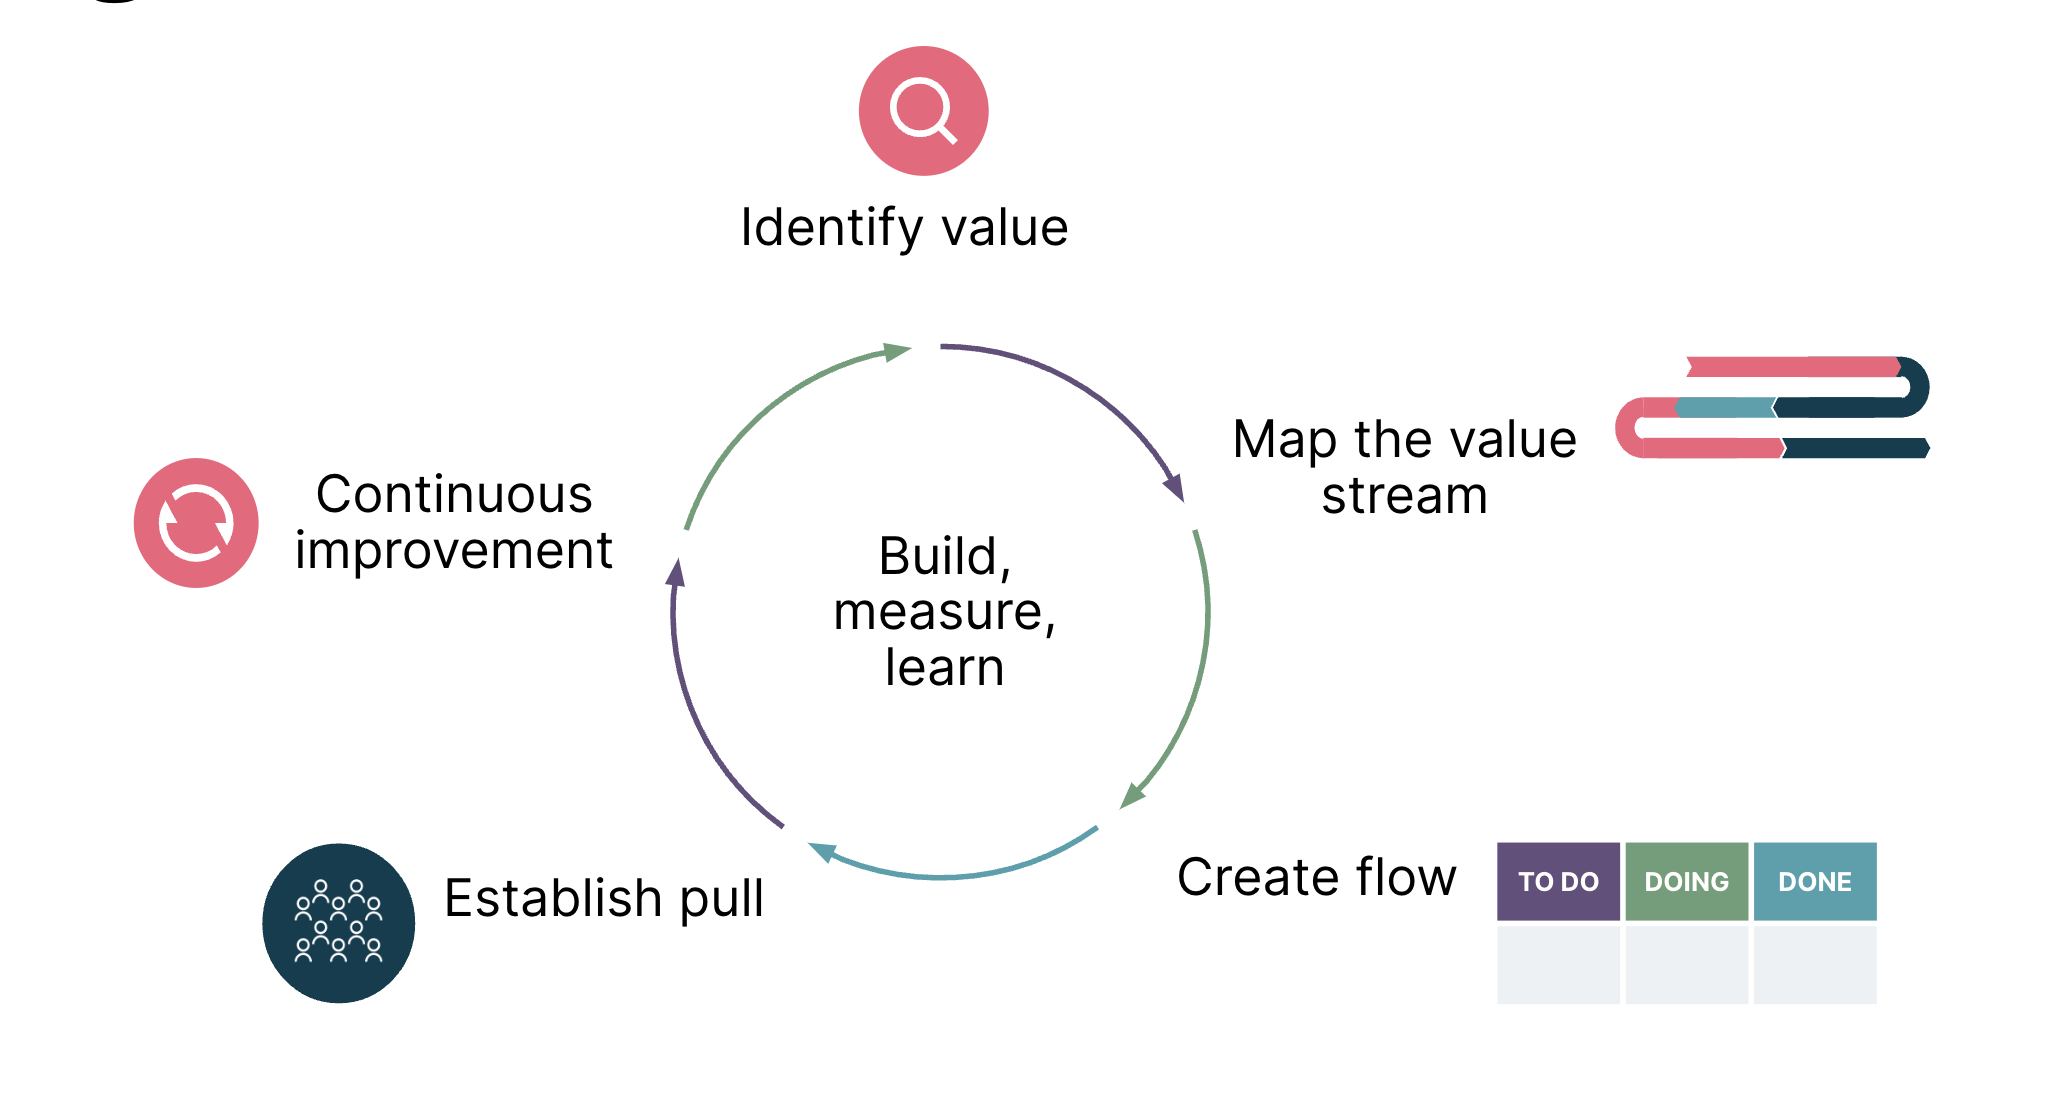 Diagram showing the five principles of Lean in a circular model with build, measure, learn in the middle and in the outer starting from the top and moving clockwise: identify value, map the value stream, create flow, establish pull and continuous improvement.